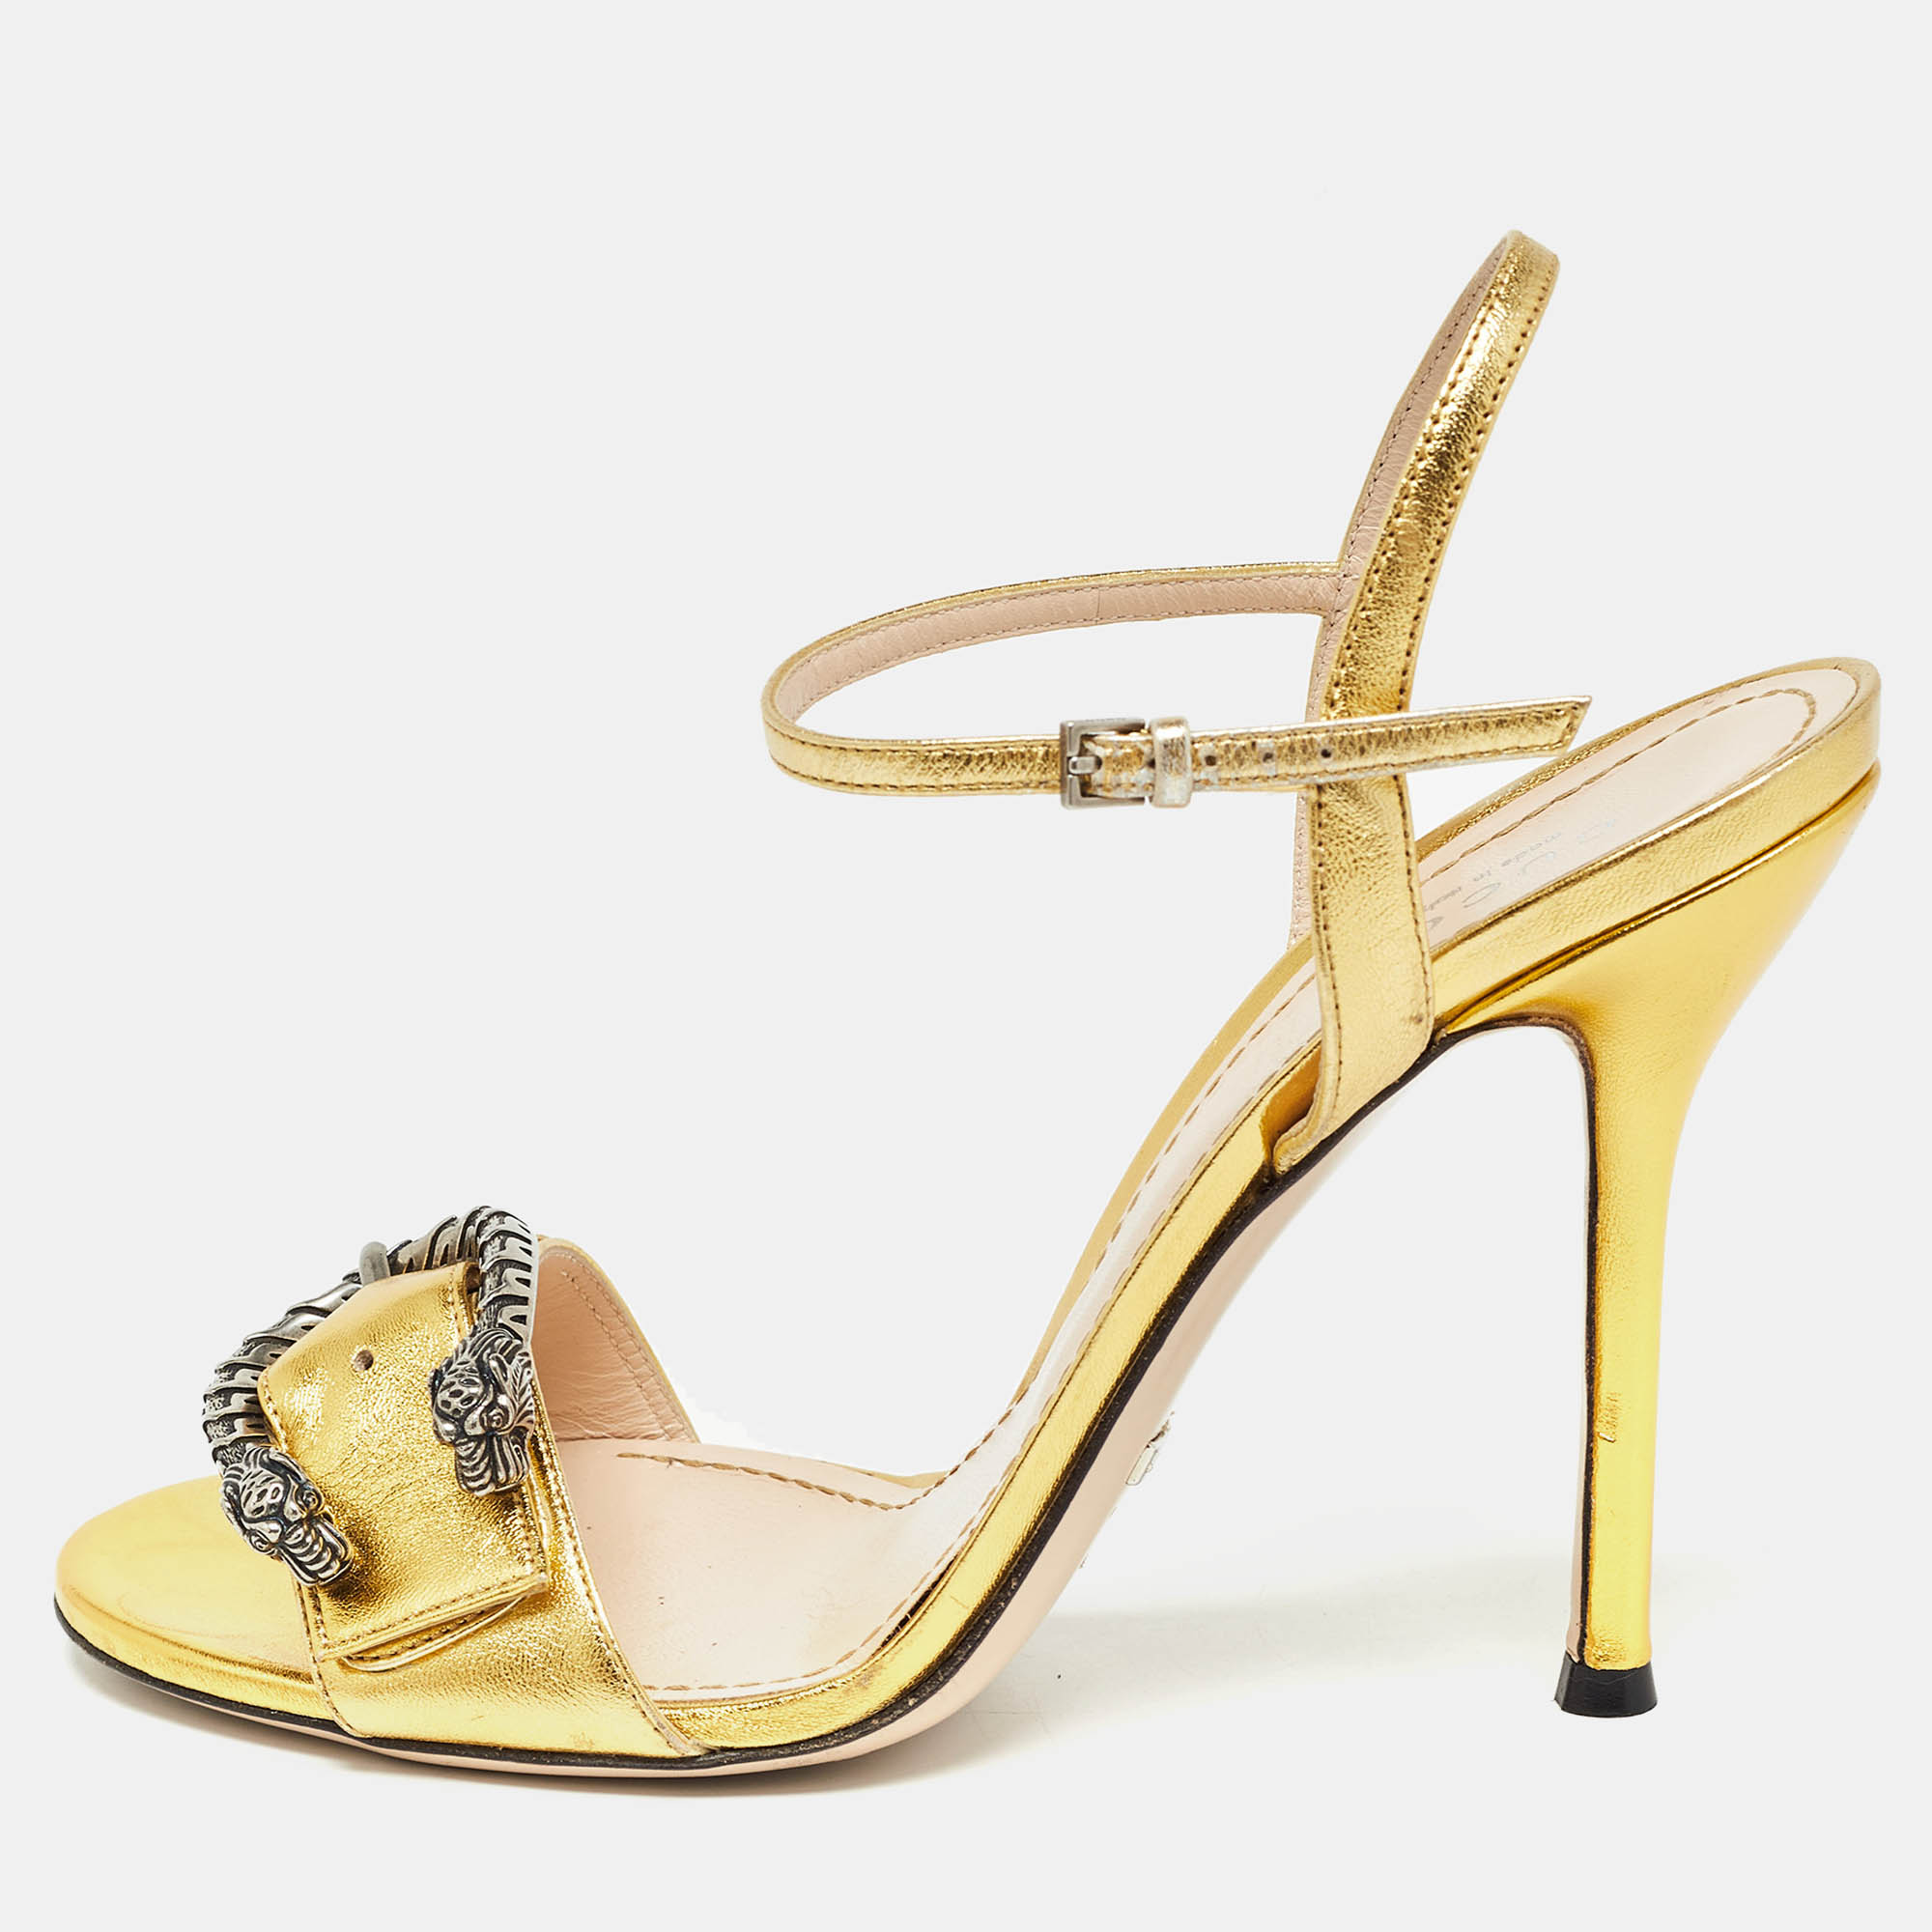 Gucci gold leather dionysus ankle strap sandals size 39